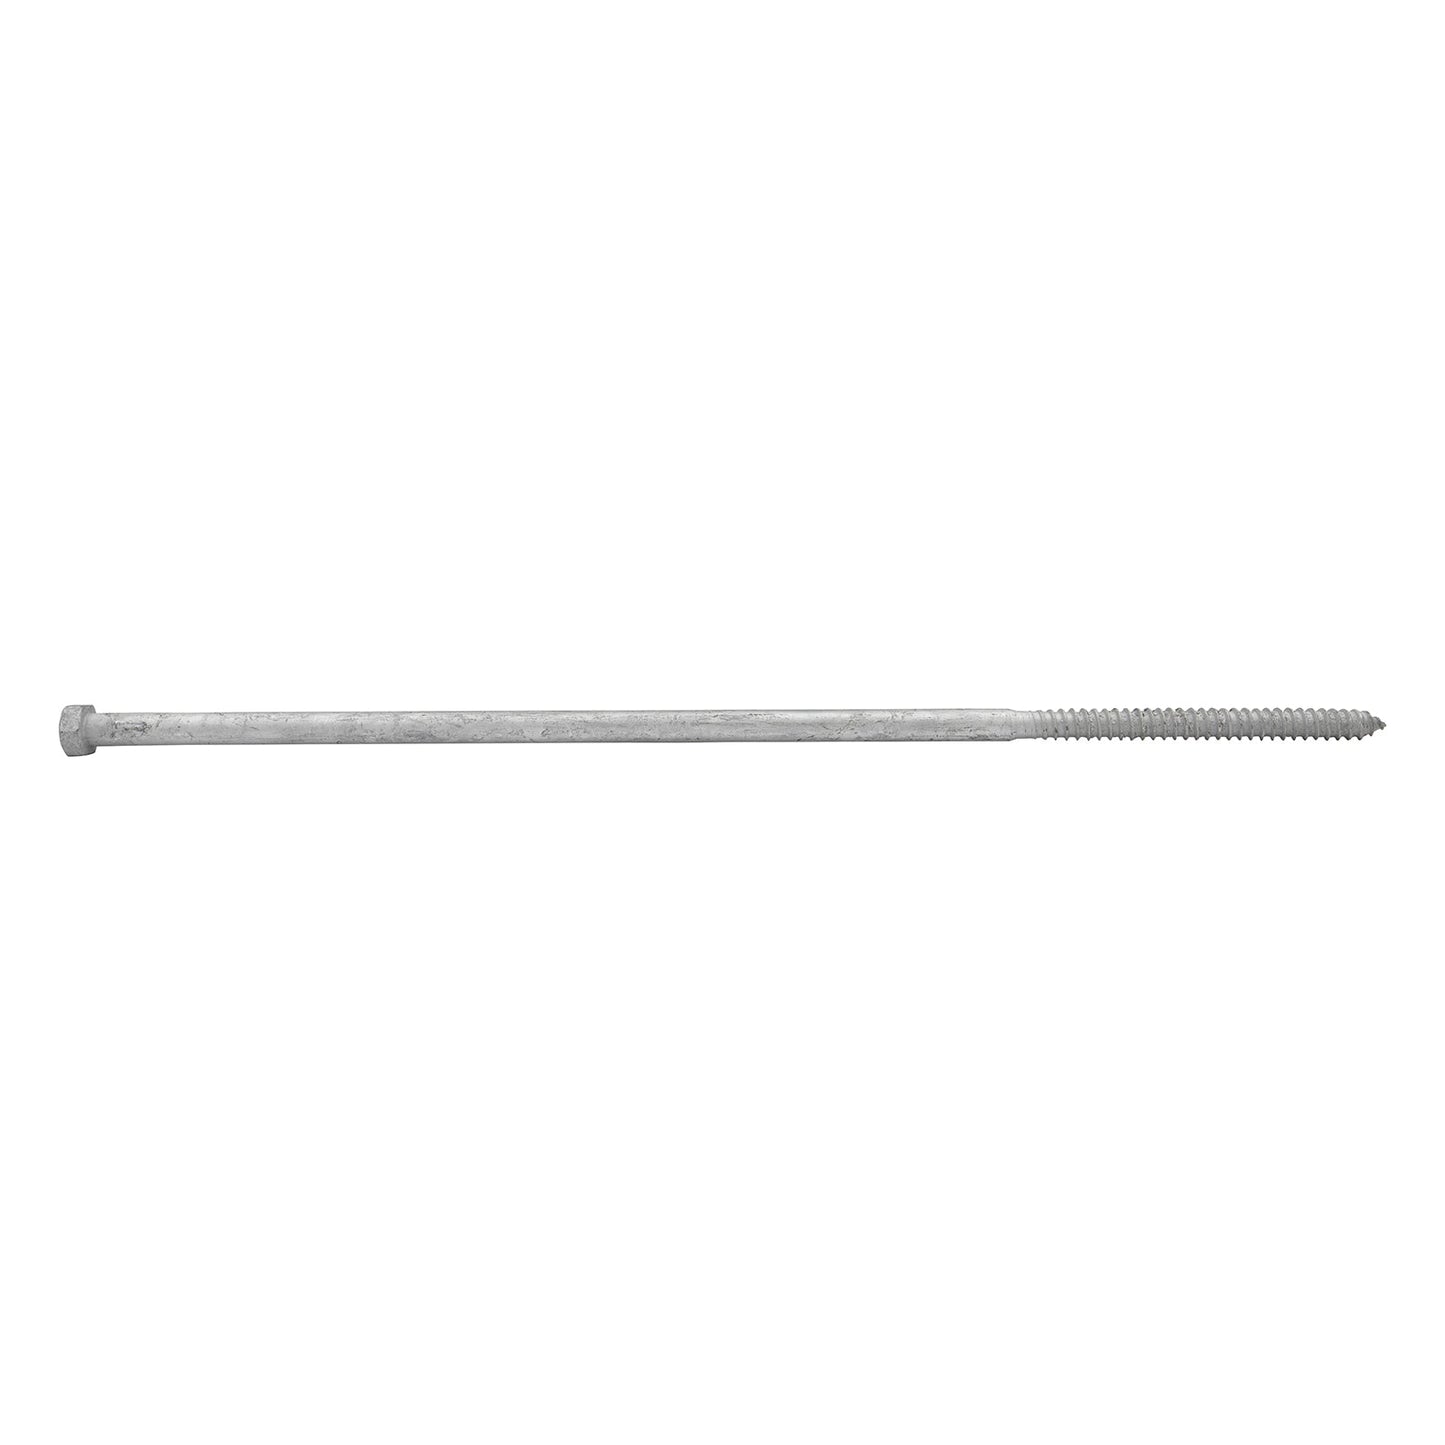 5/8"-5 x 24" Conquest Hex Head Lag Bolt for Wood - Hot Dip Galvanized